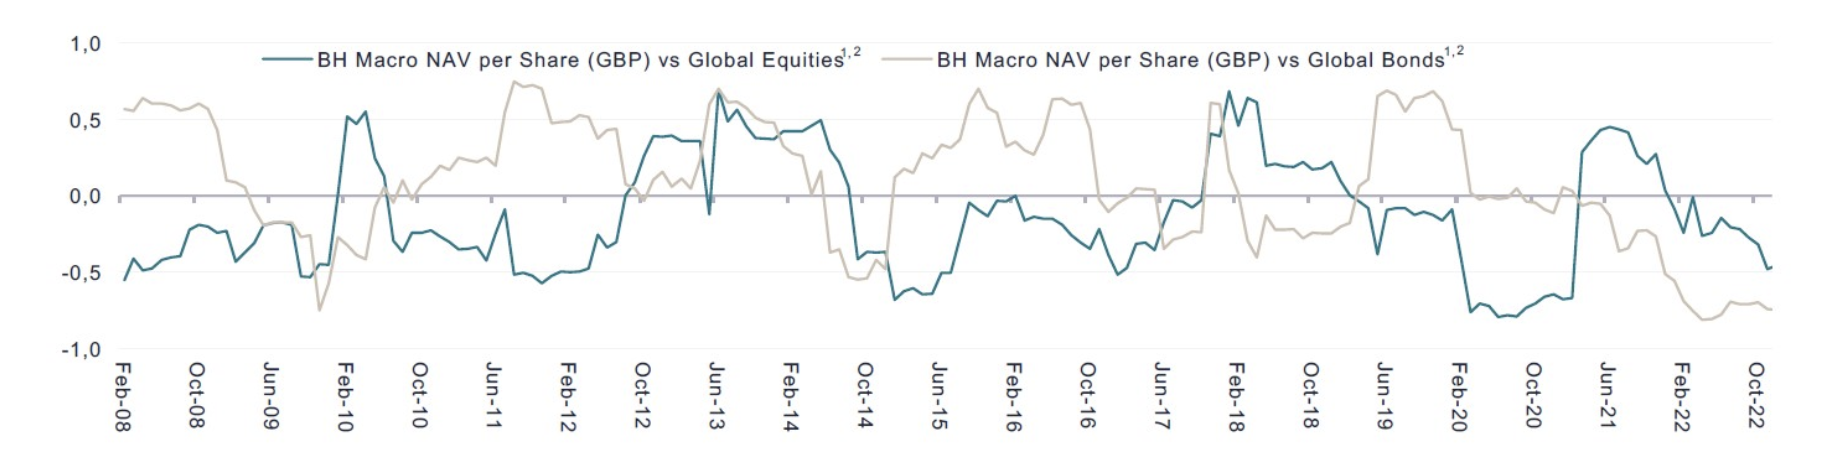 ROLLING ONE-YEAR CORRELATIONS OF MONTHLY RETURNS OF BH MACRO NAV WITH GLOBAL EQUITIES AND GLOBAL BONDS